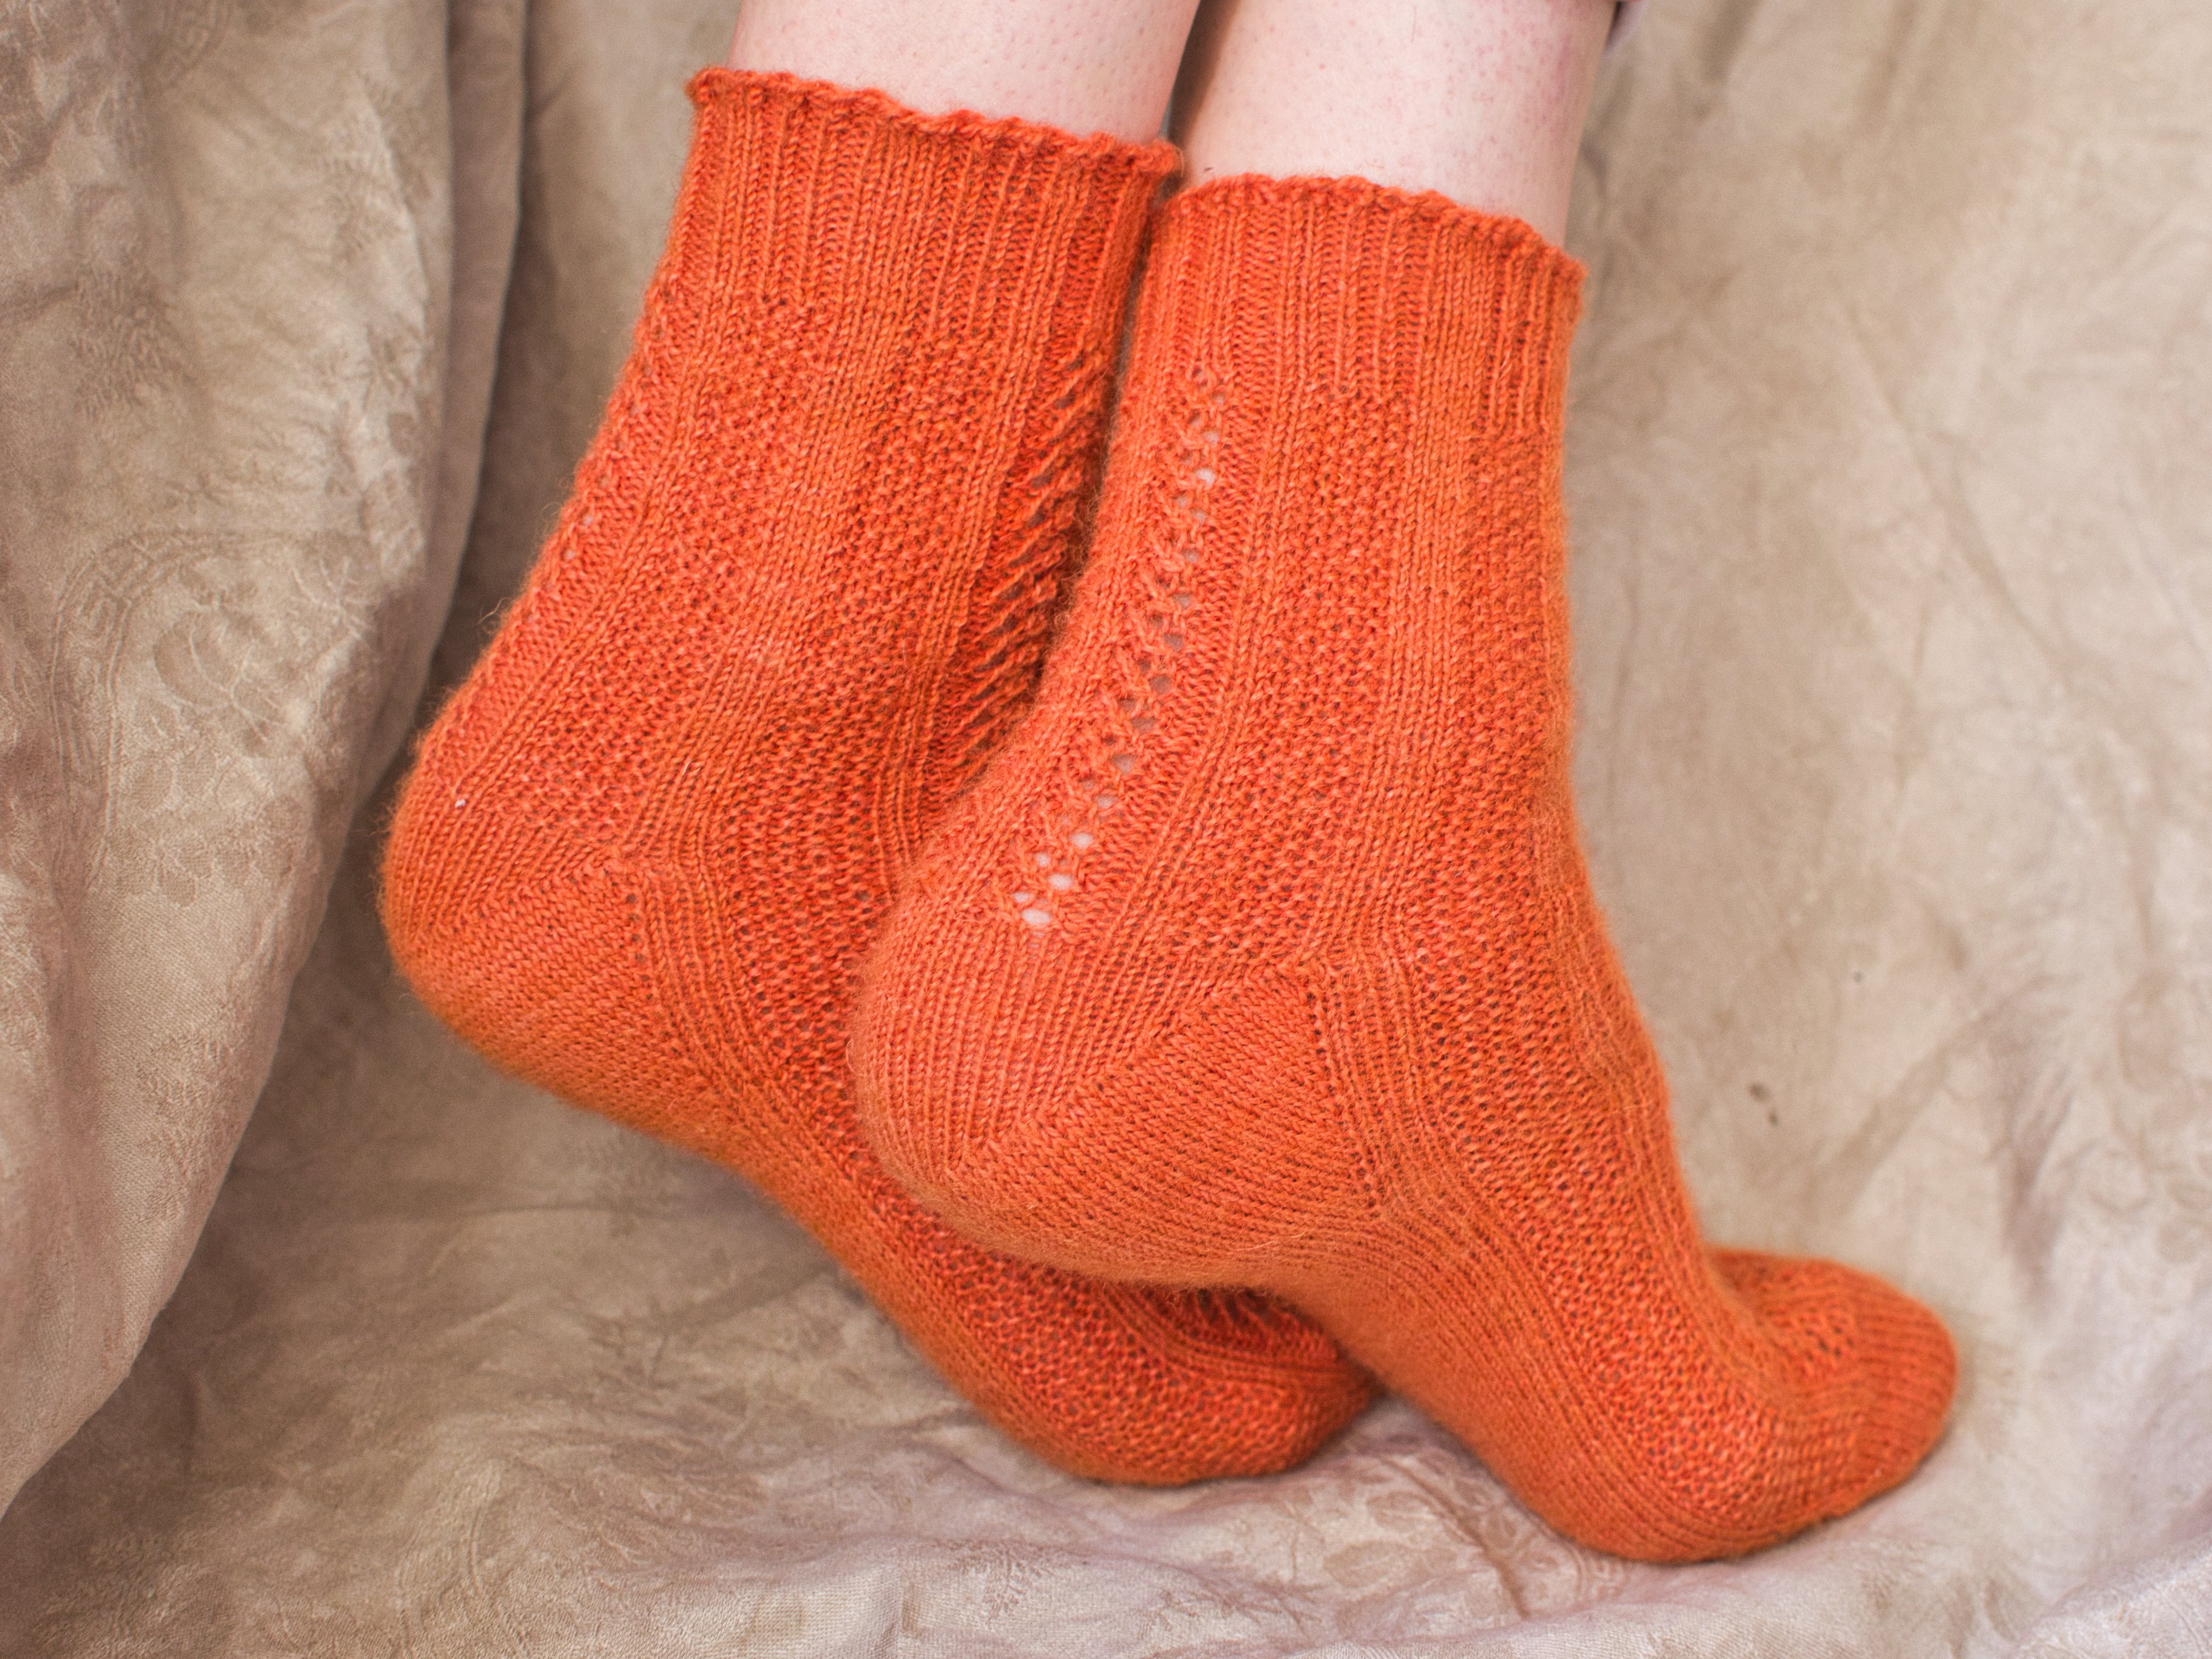 What makes a good sock yarn? 5 characteristics to look for